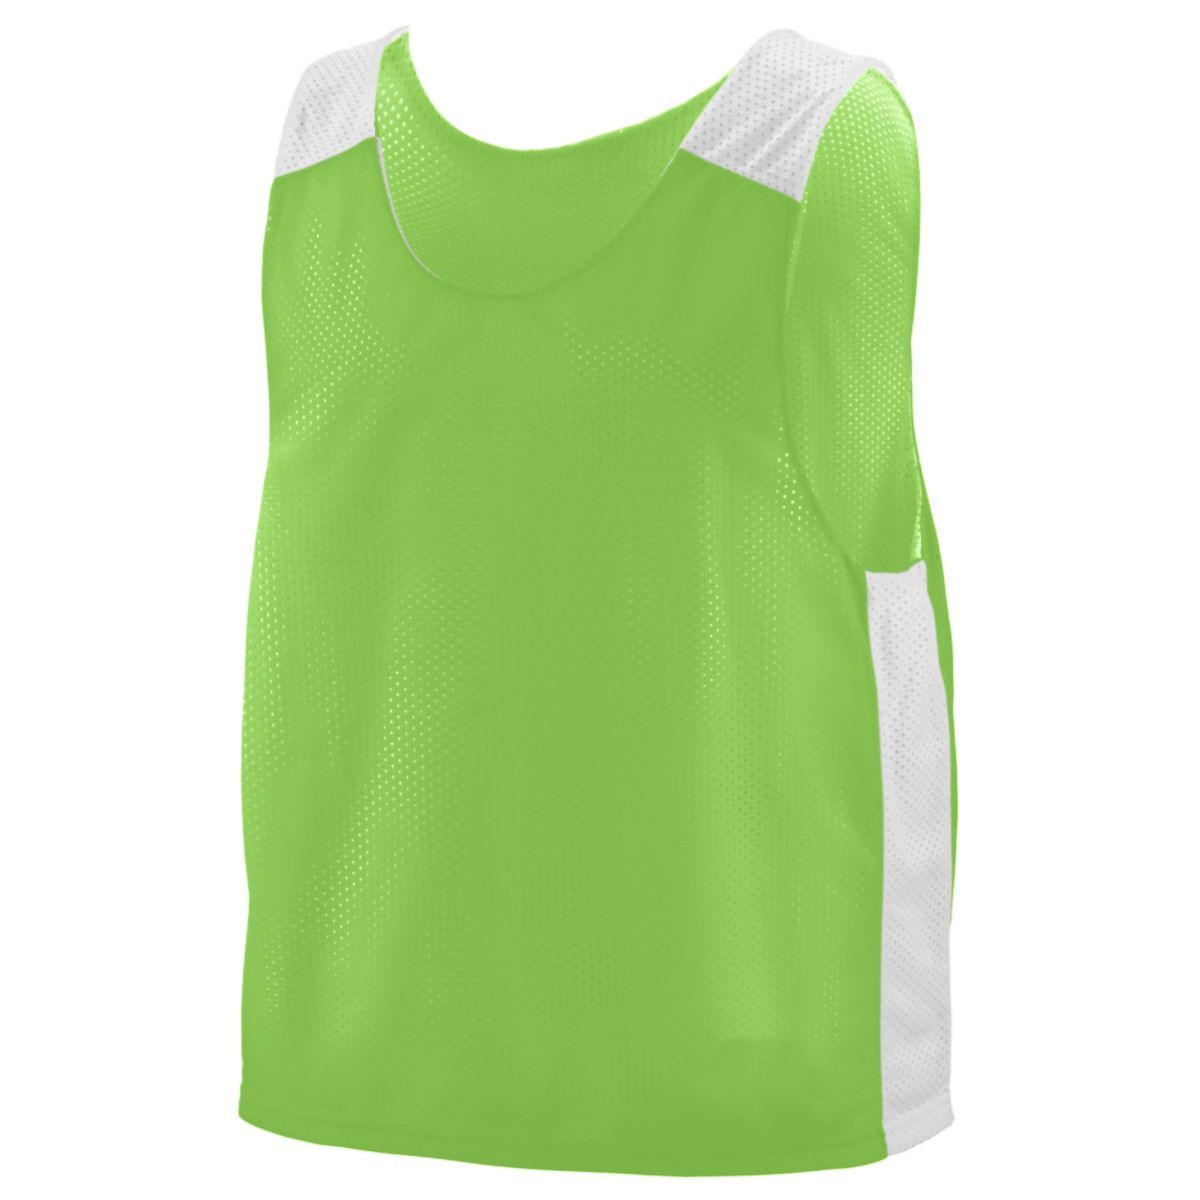 Augusta Sportswear Face Off Reversible Jersey in Lime/White  -Part of the Adult, Adult-Jersey, Augusta-Products, Lacrosse, Shirts, All-Sports, All-Sports-1 product lines at KanaleyCreations.com